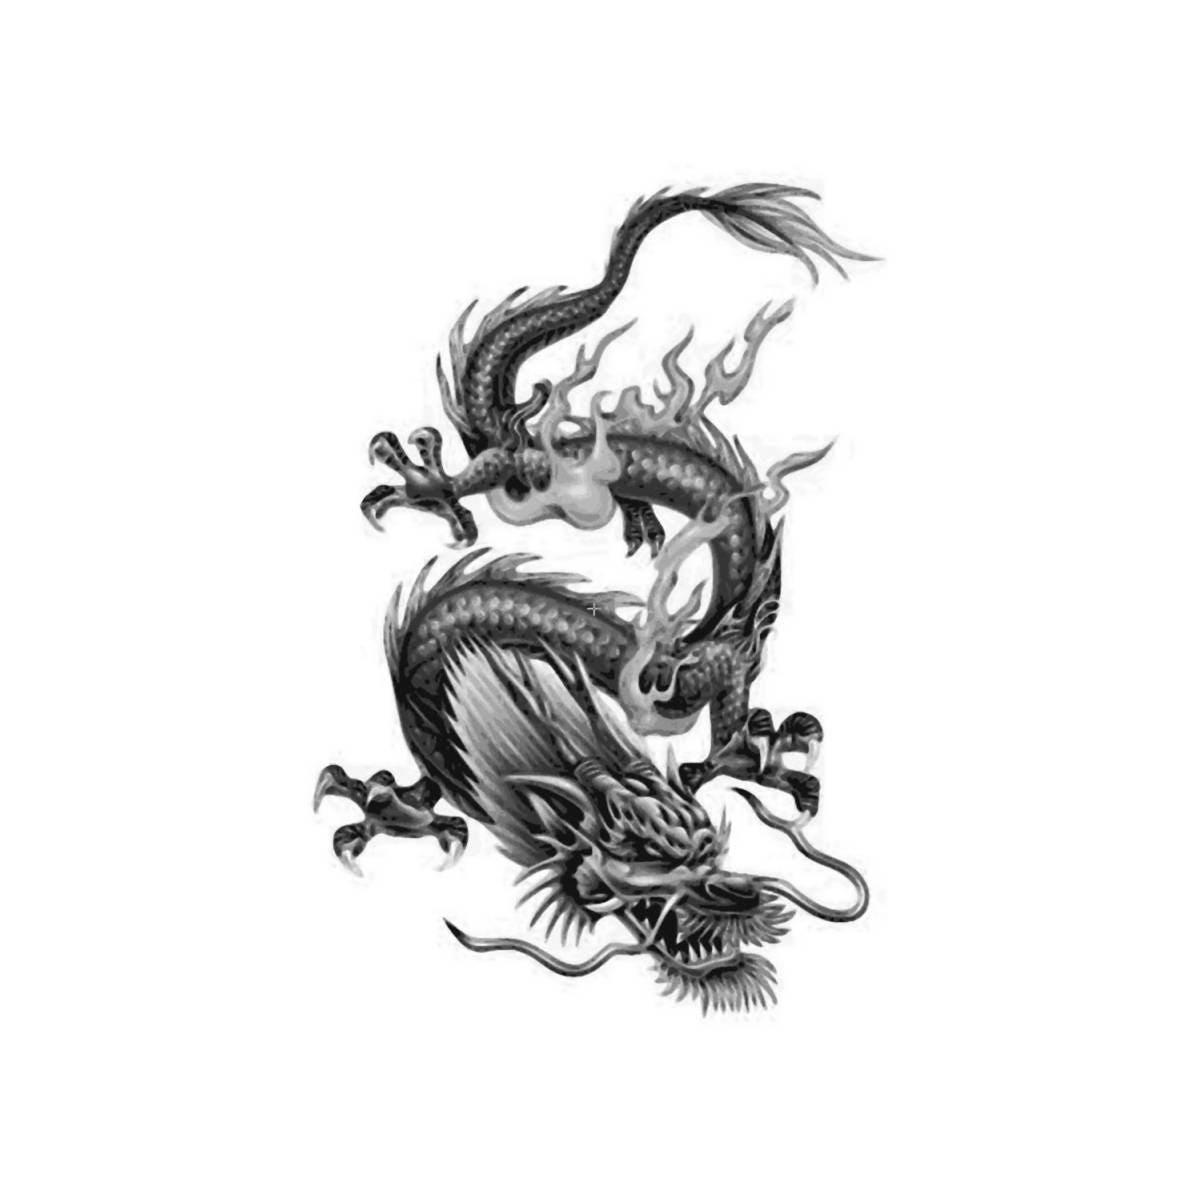 Chinese Ink Brush Dragon, Other by JP Tattoo Art - Foundmyself